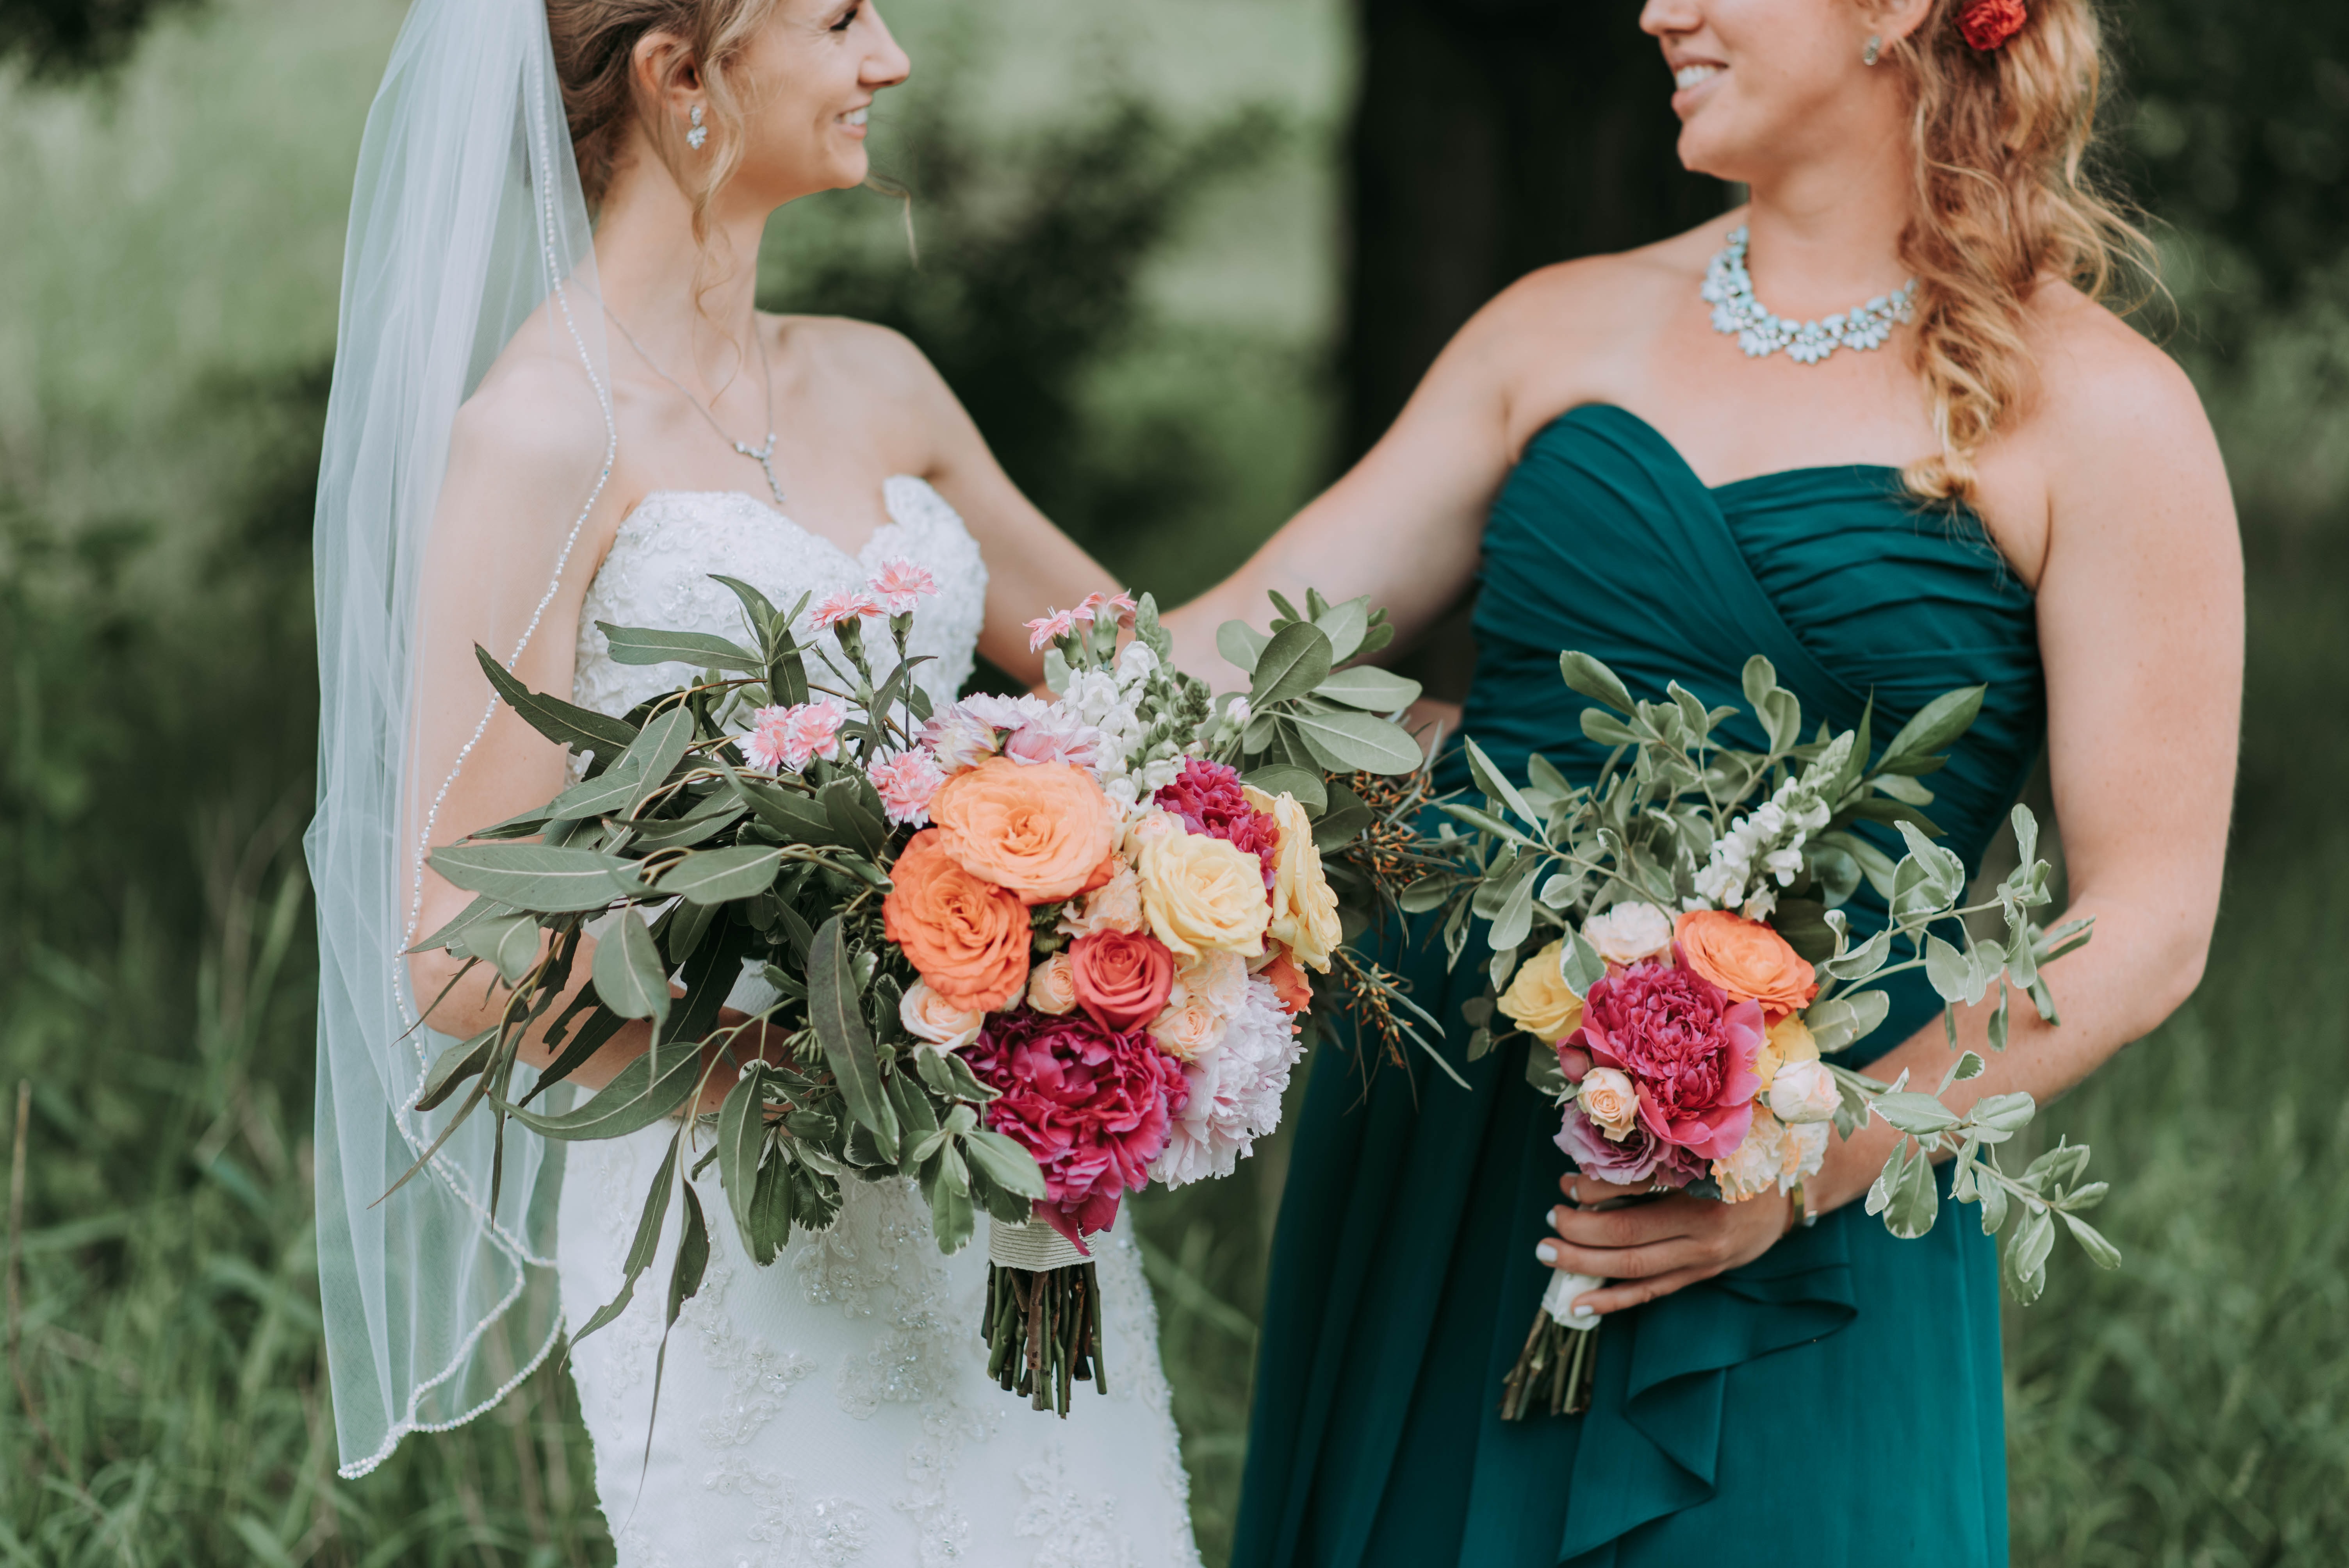 A bride smiling with her bridesmaid in green